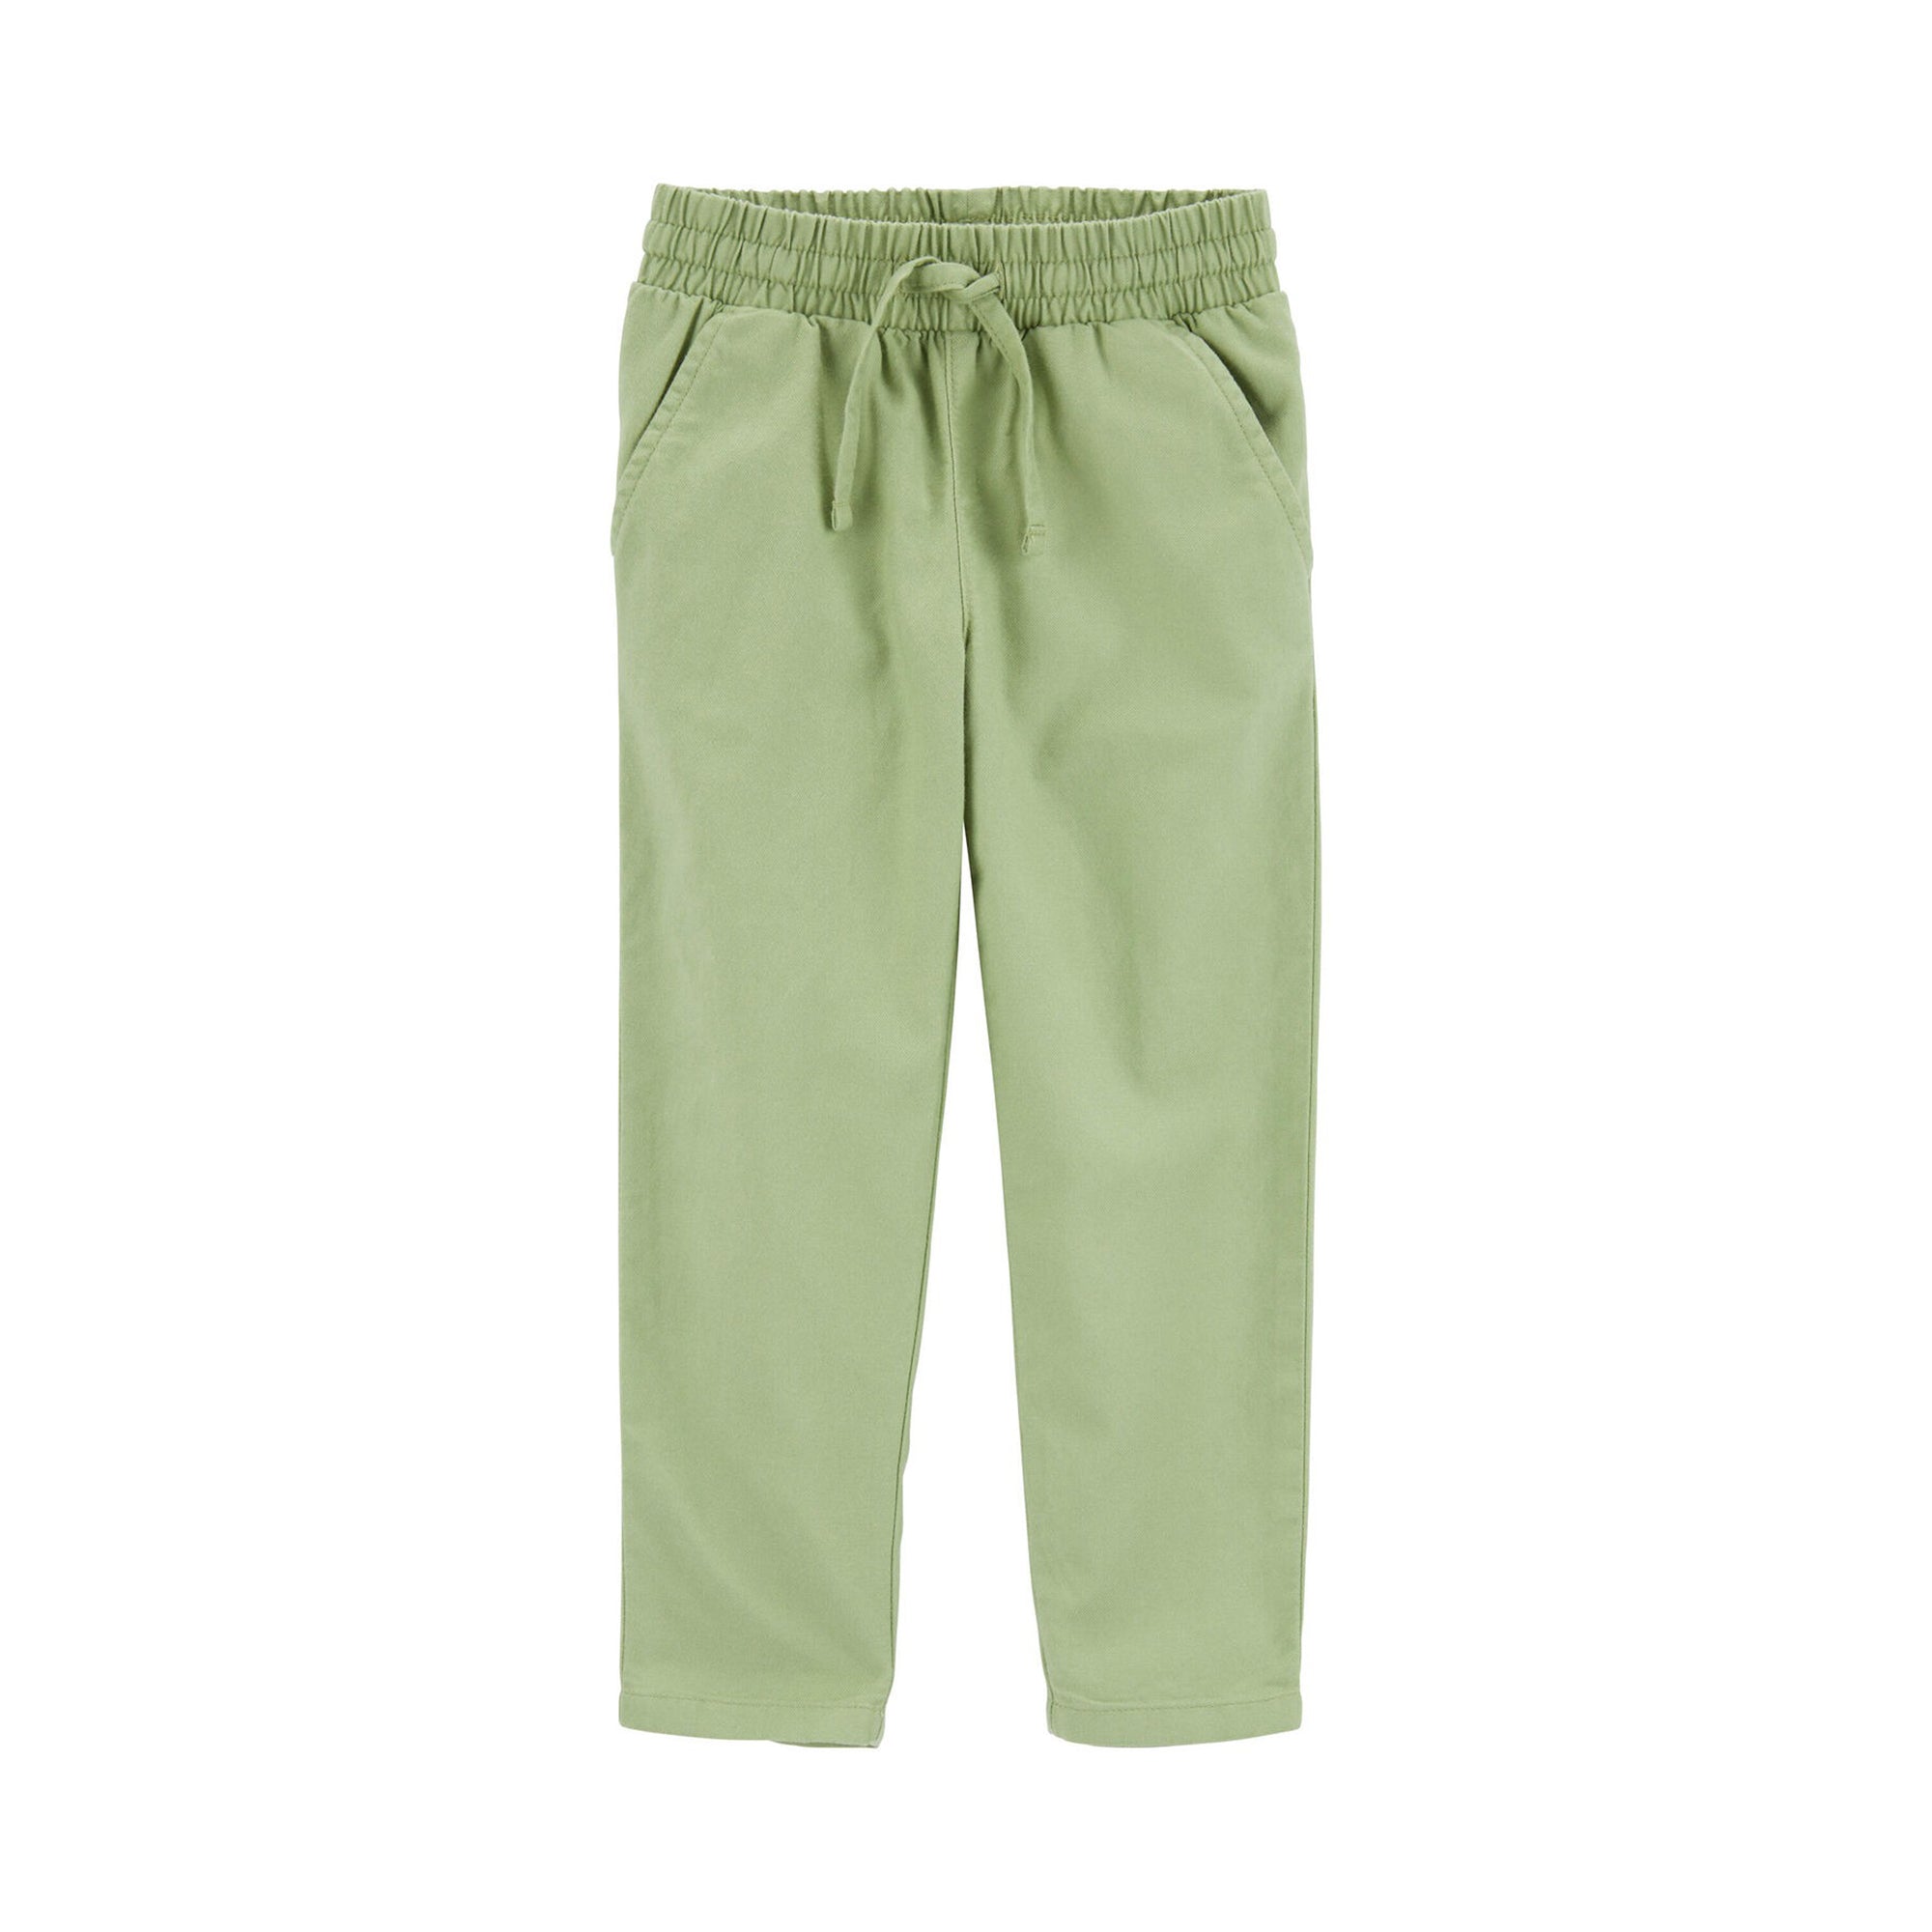 Cargo Pants for Men Size Pocket Lace Up Elastic Waist Pants Trousers  Overall (Green, L) - Walmart.com